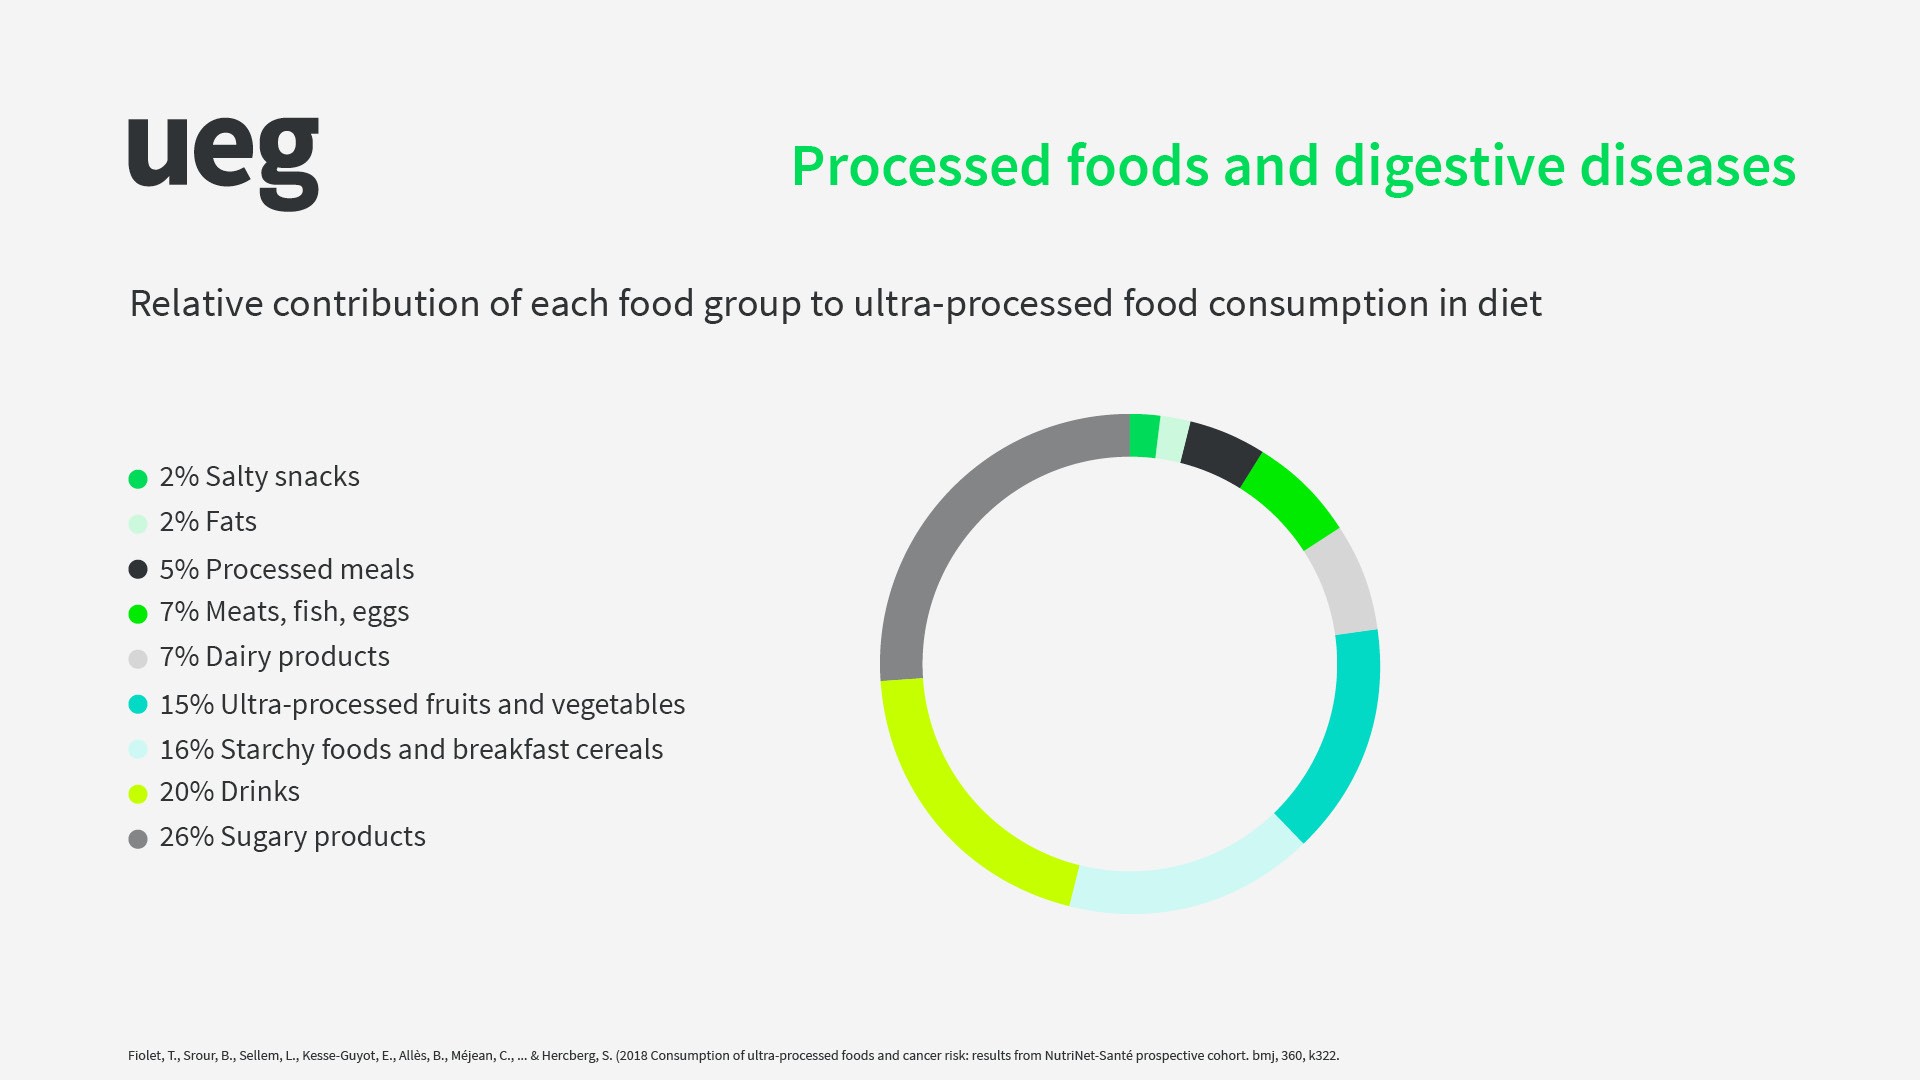 Processed foods and digestive diseases infographic